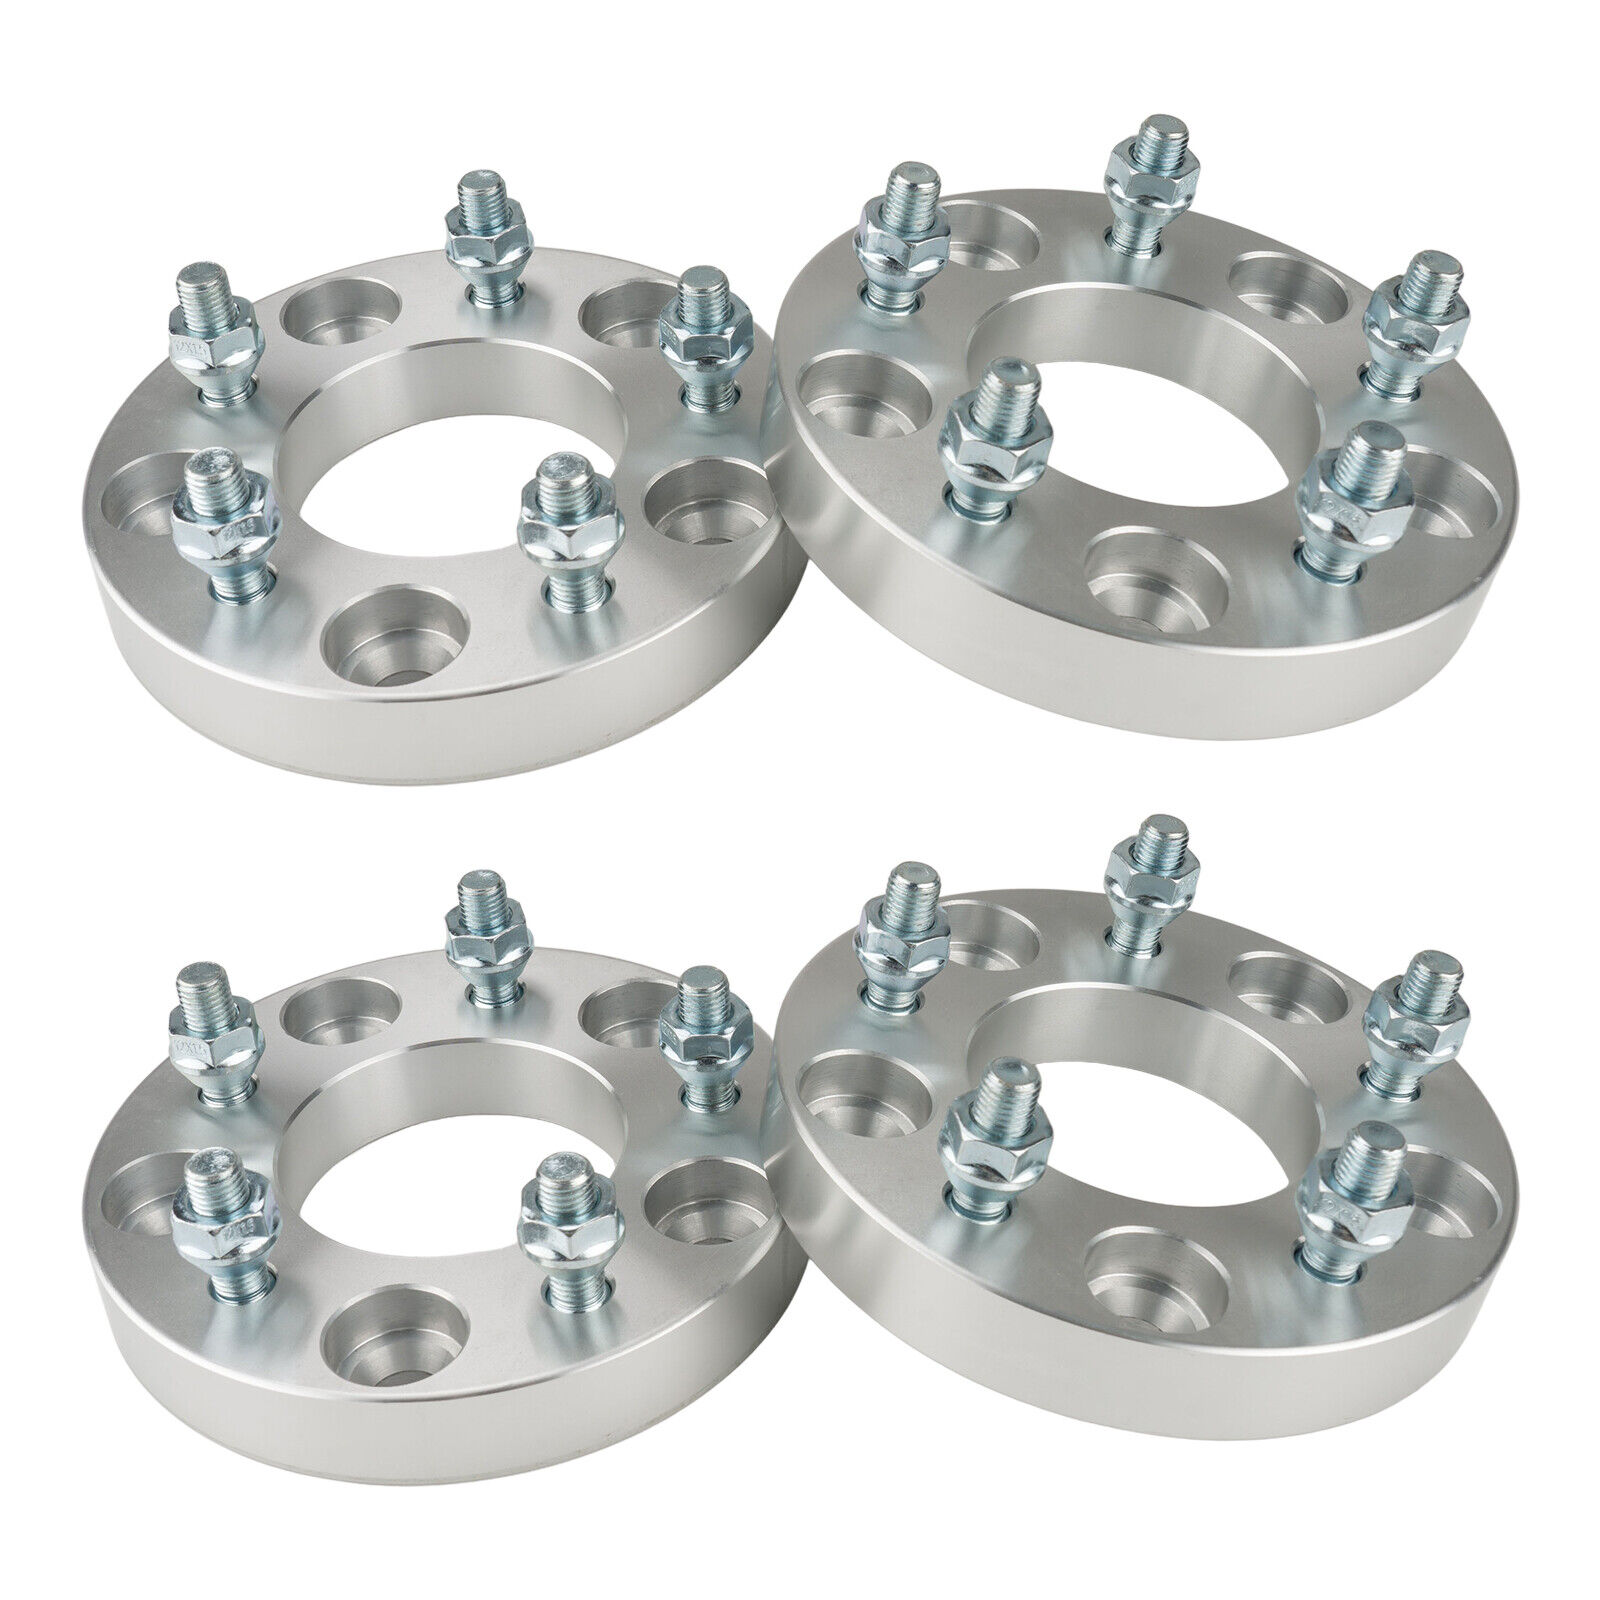 4Pcs 5x5 to 5x4.75 Wheel Spacers Adapters 1 inch Thick For Grand Caravan Journey